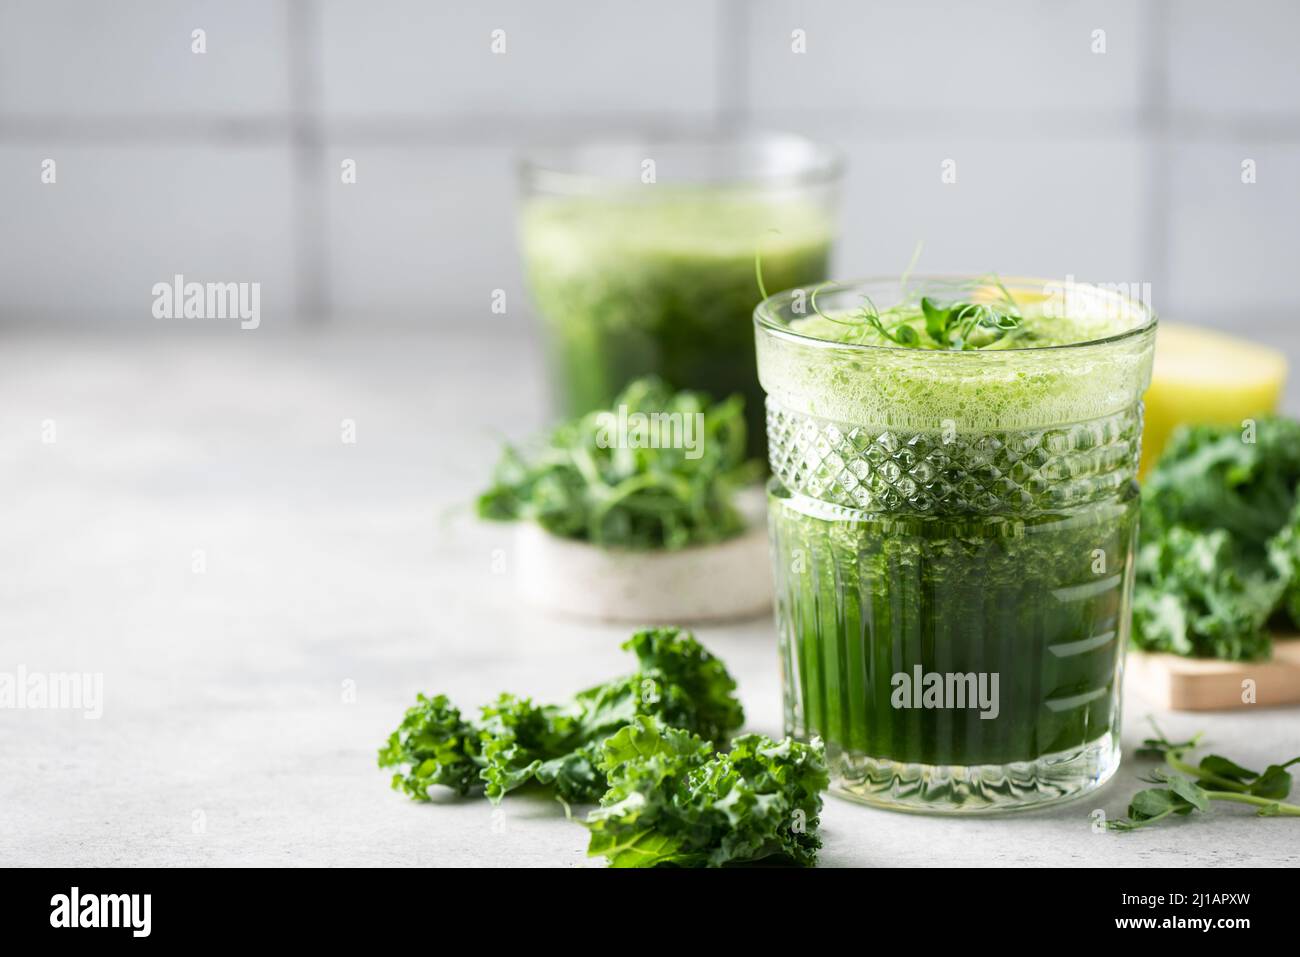 Vegan Green detox juice or smoothie in glass on grey concrete kitchen table. Copy space for text or design Stock Photo